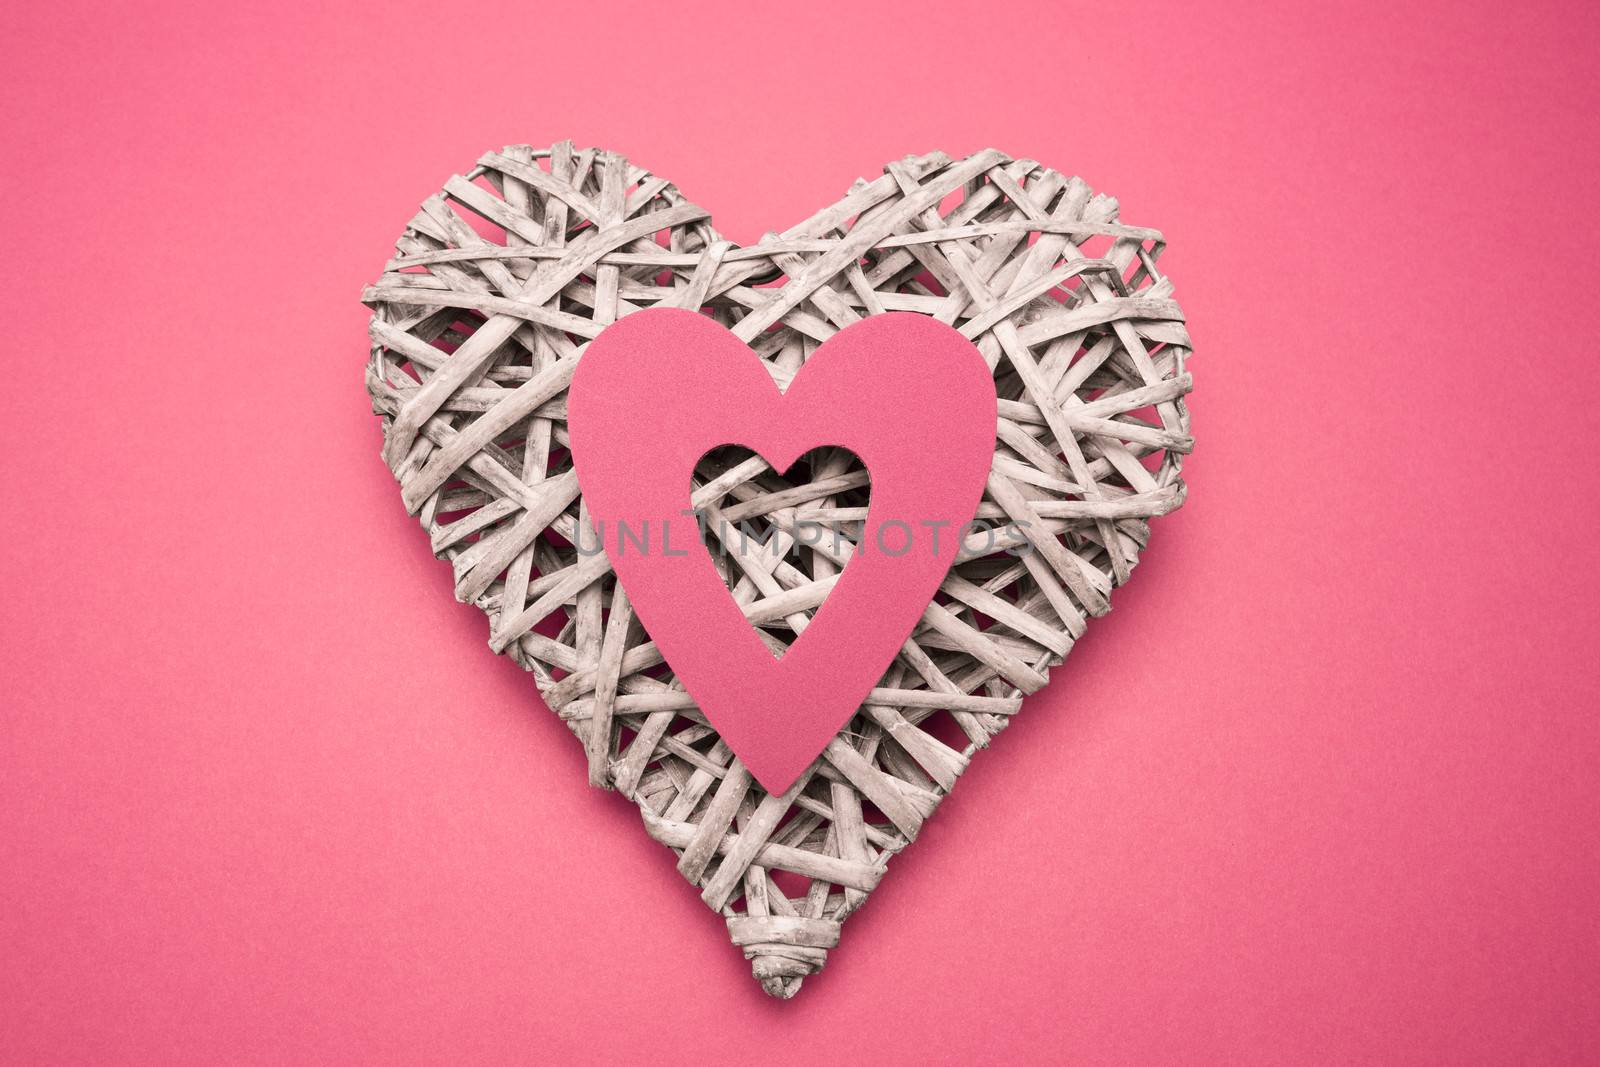 Wicker heart ornament with paper cut out by Wavebreakmedia